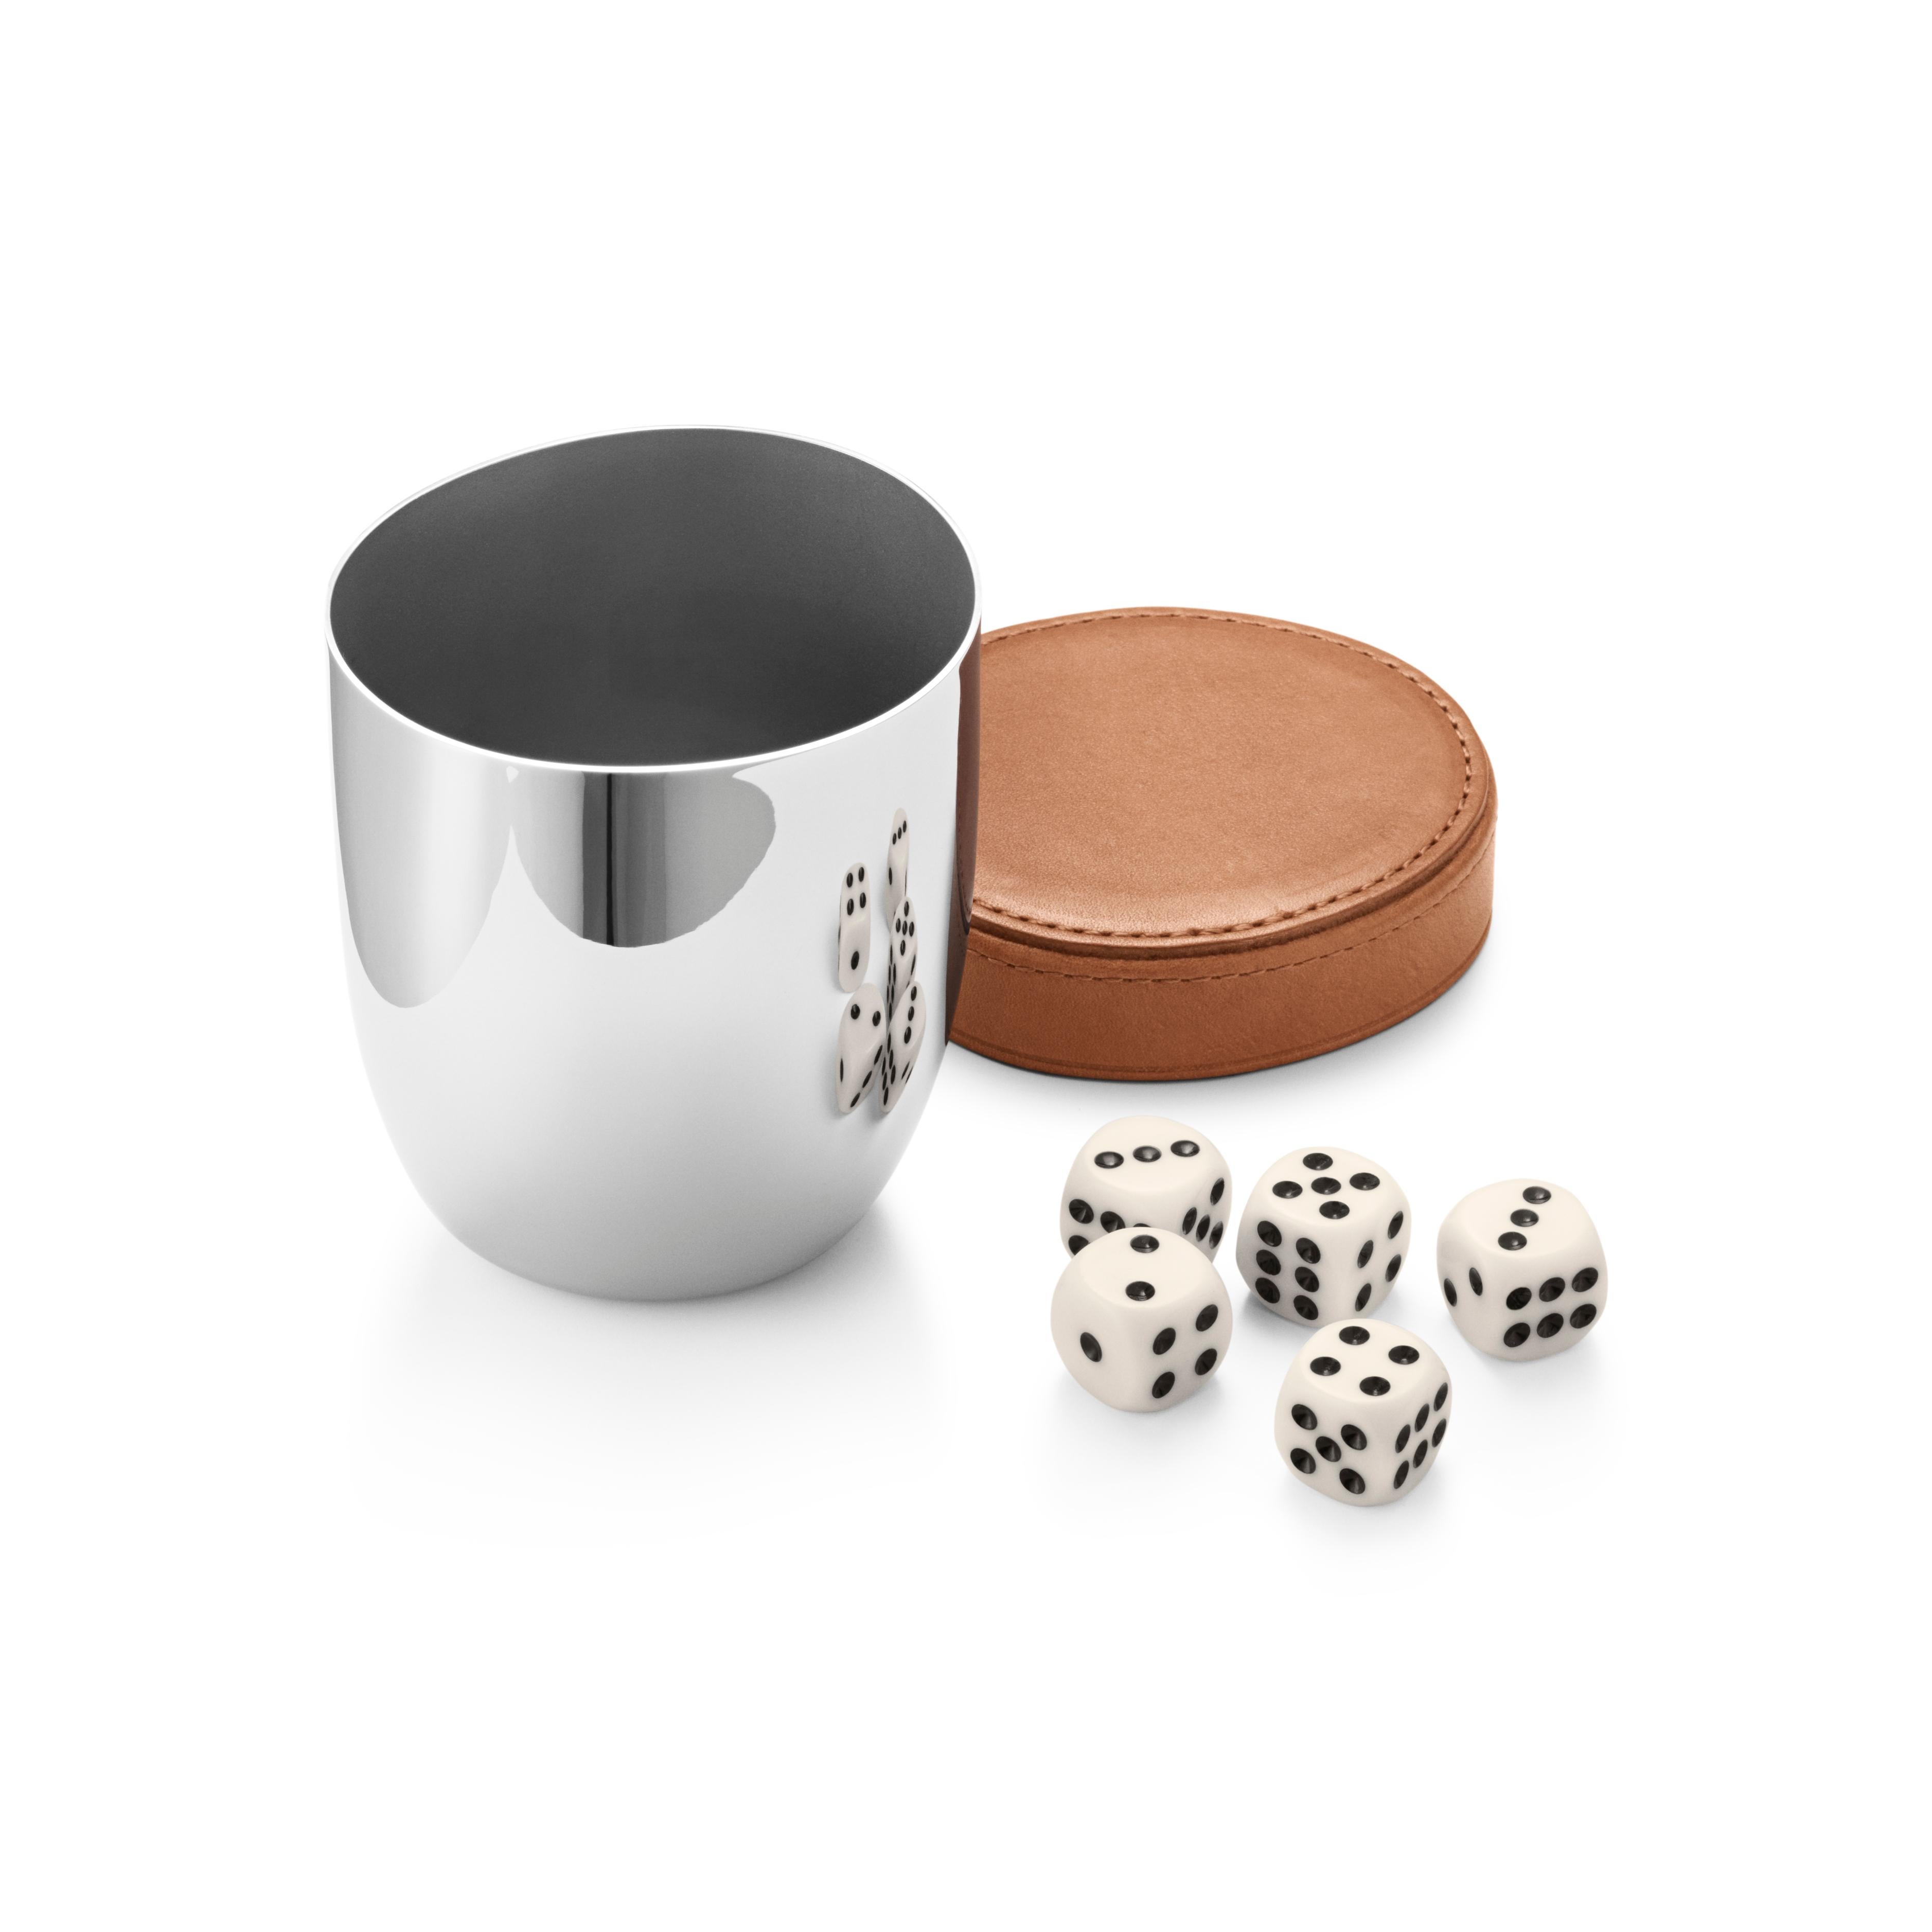 Solve the eternal problem of what to buy for someone who has everything! This stylish dice set with stainless steel cup is perfect for someone who likes to play games at home or when travelling. The curved cup is a pleasure to hold and the leather